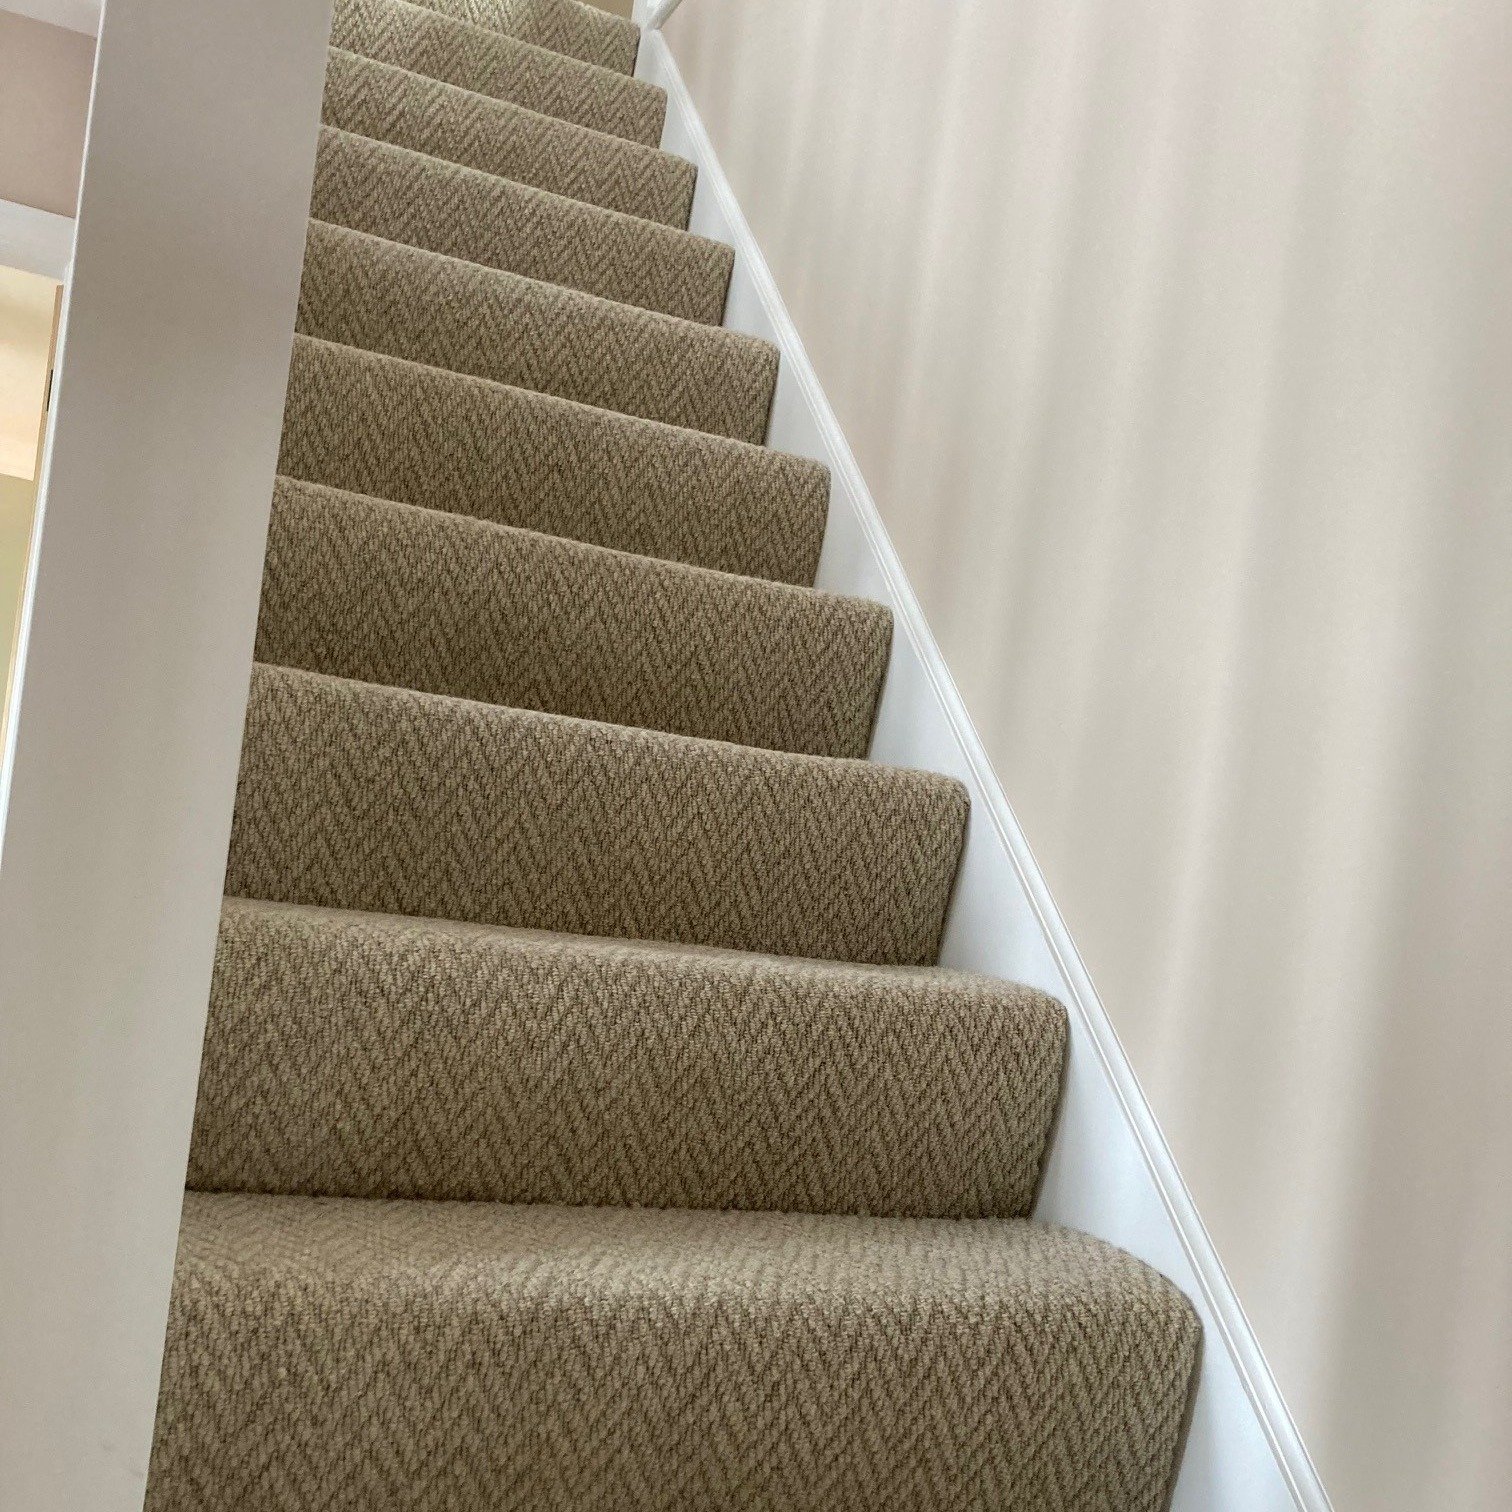 Beautiful Herringbone design carpet fitting by us on a Stairs last week! 

More pictures to follow of the transformation in this Home, we've fitted the rest of their Ground Floor in Karndean! Watch this space! 😍

📸 Lifestyle Flooring - Rolling Hill